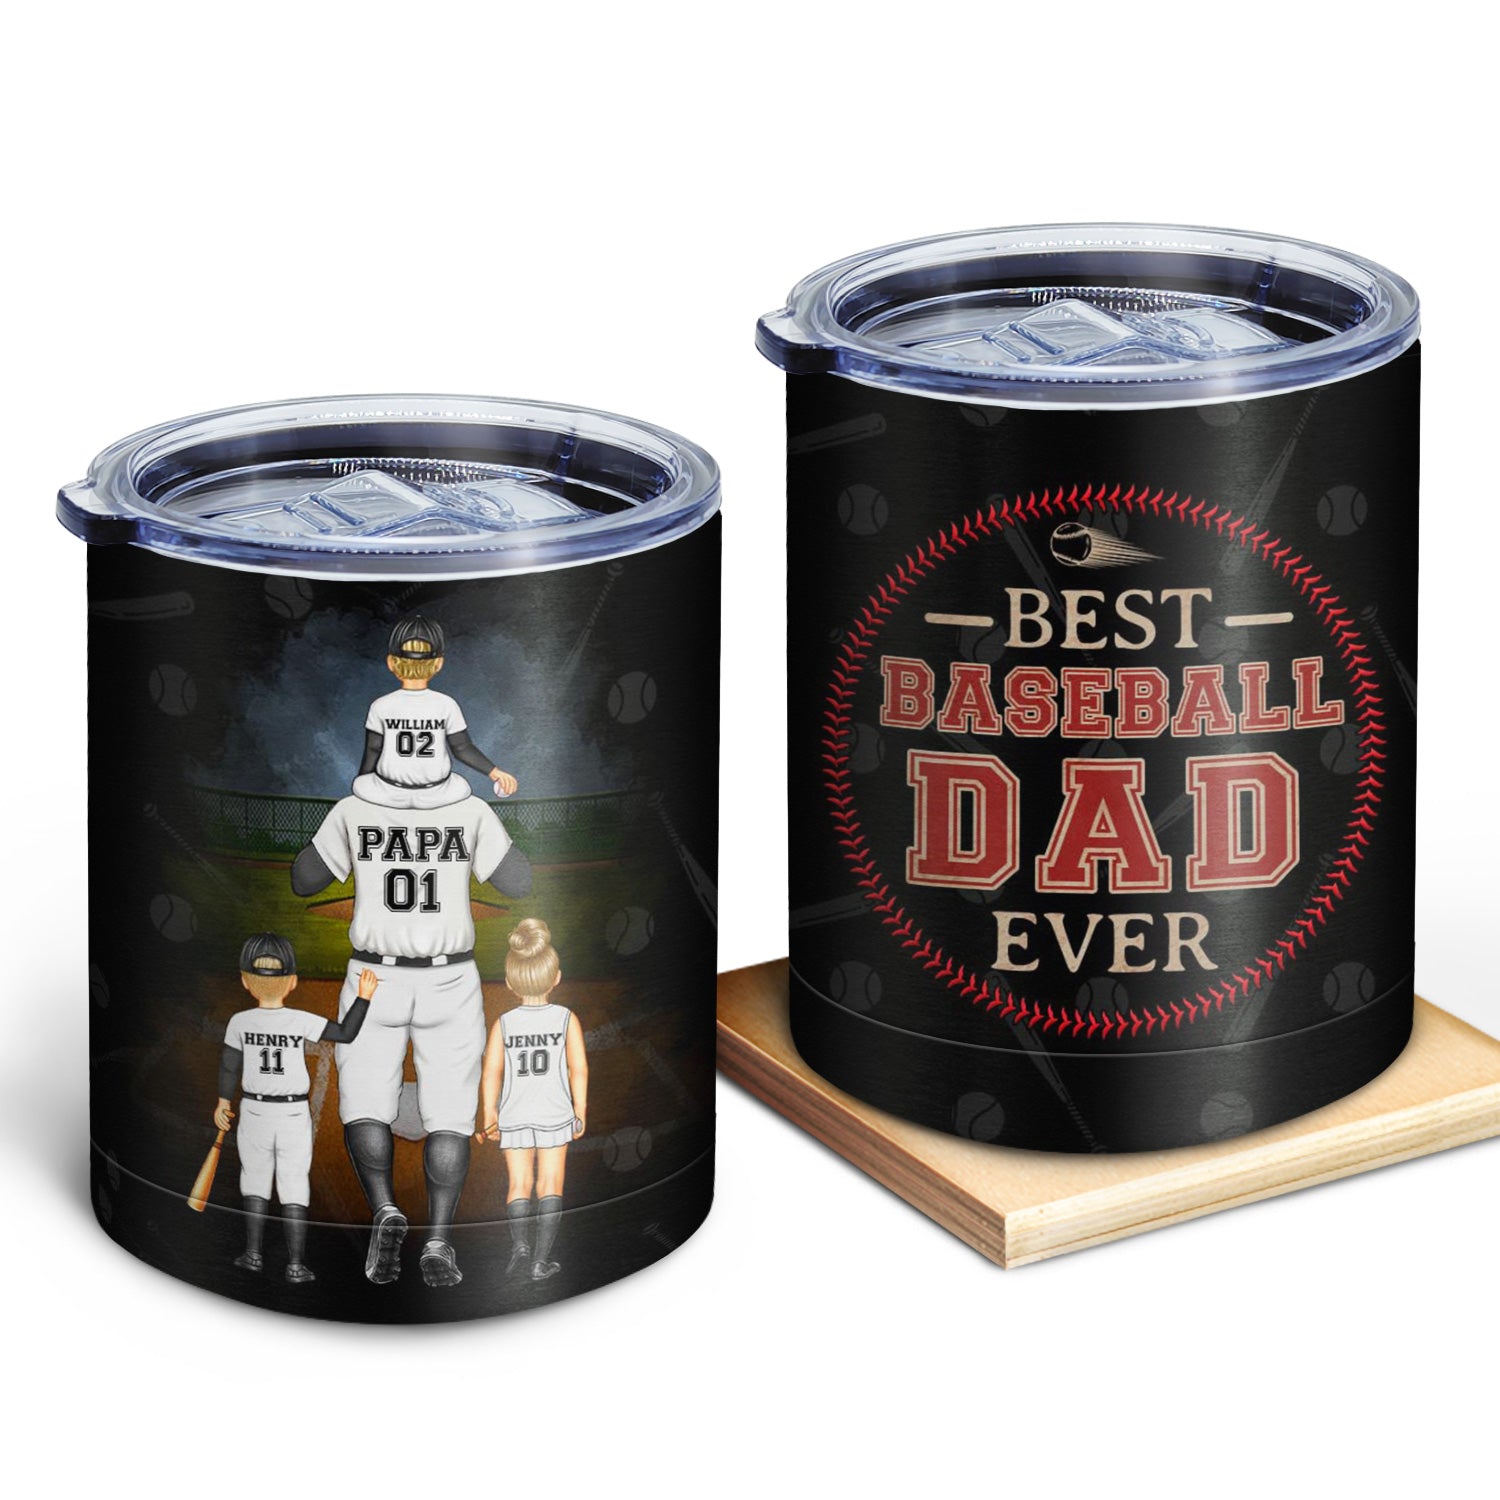 Best Baseball Dad Ever - Gift For Dad, Father, Baseball, Softball Fans - Personalized Lowball Tumbler